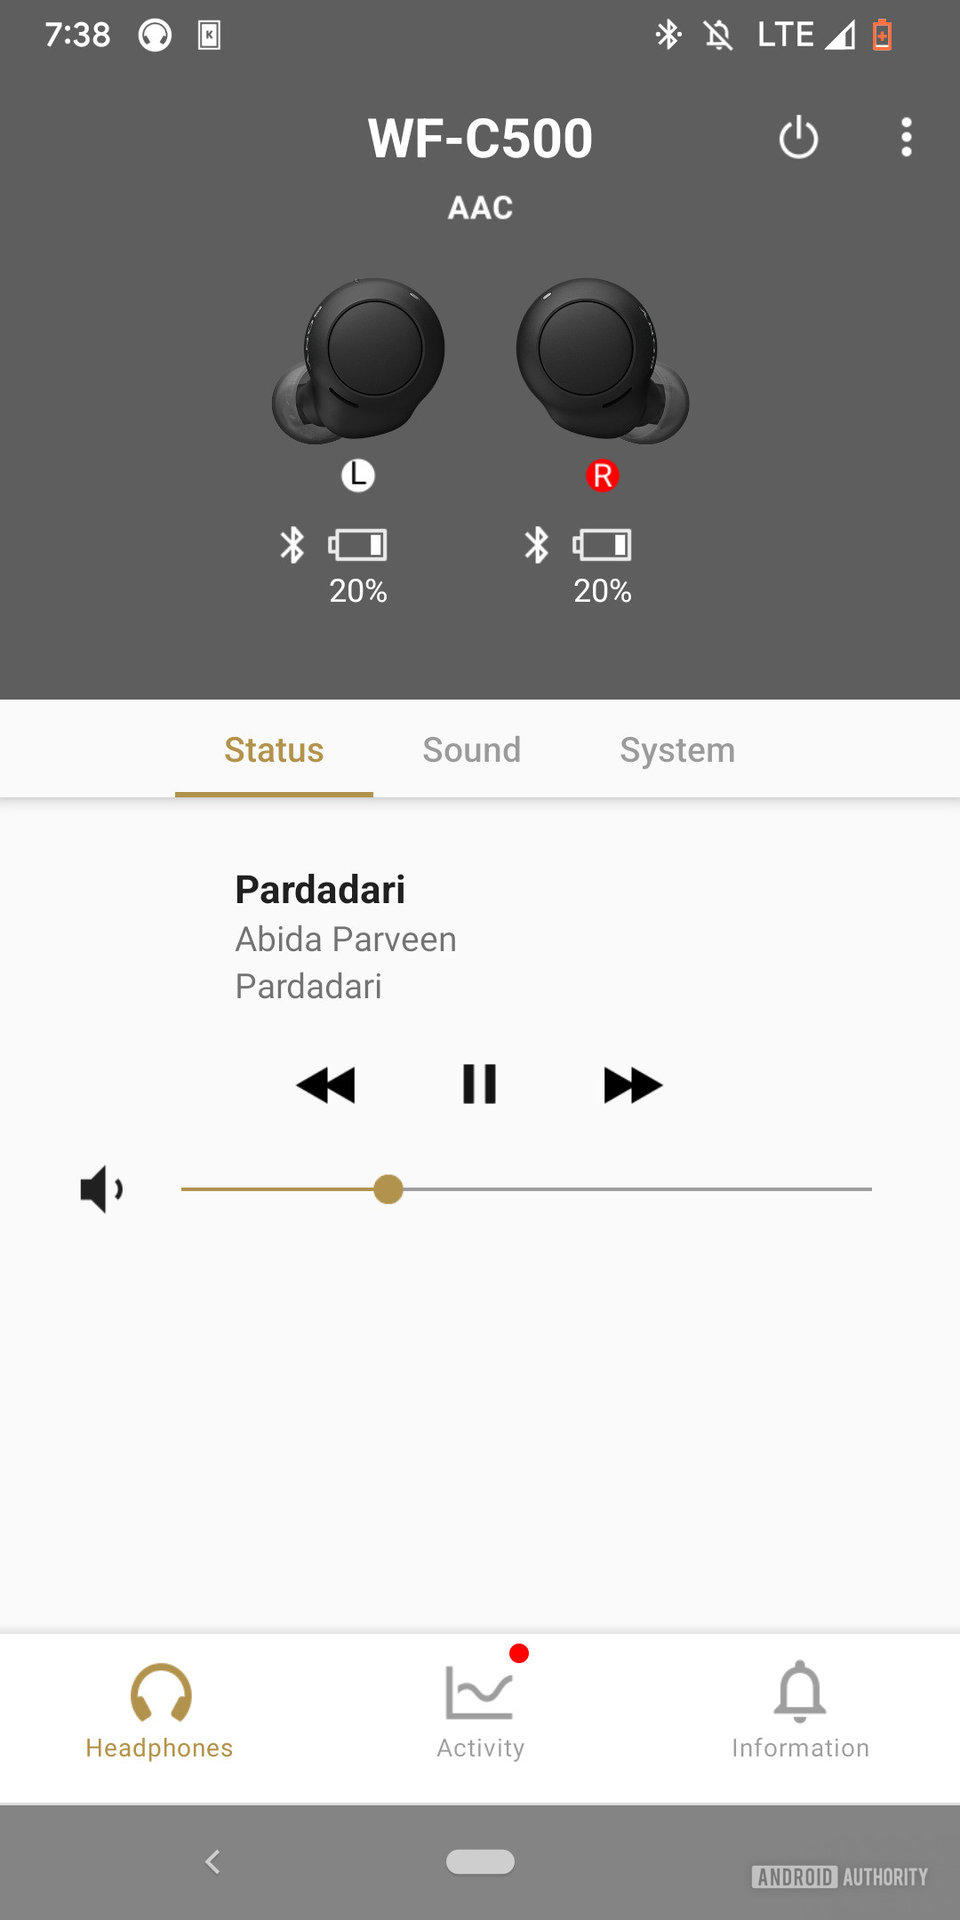 The Sony Headphones Connect app with the WF-C500 connected showing the Sound tab with the song "Pardadari" by Abida Parveen playing, playback controls visible, the battery life of earch earbud, and the Bluetooth codec the earbuds are using all shown.